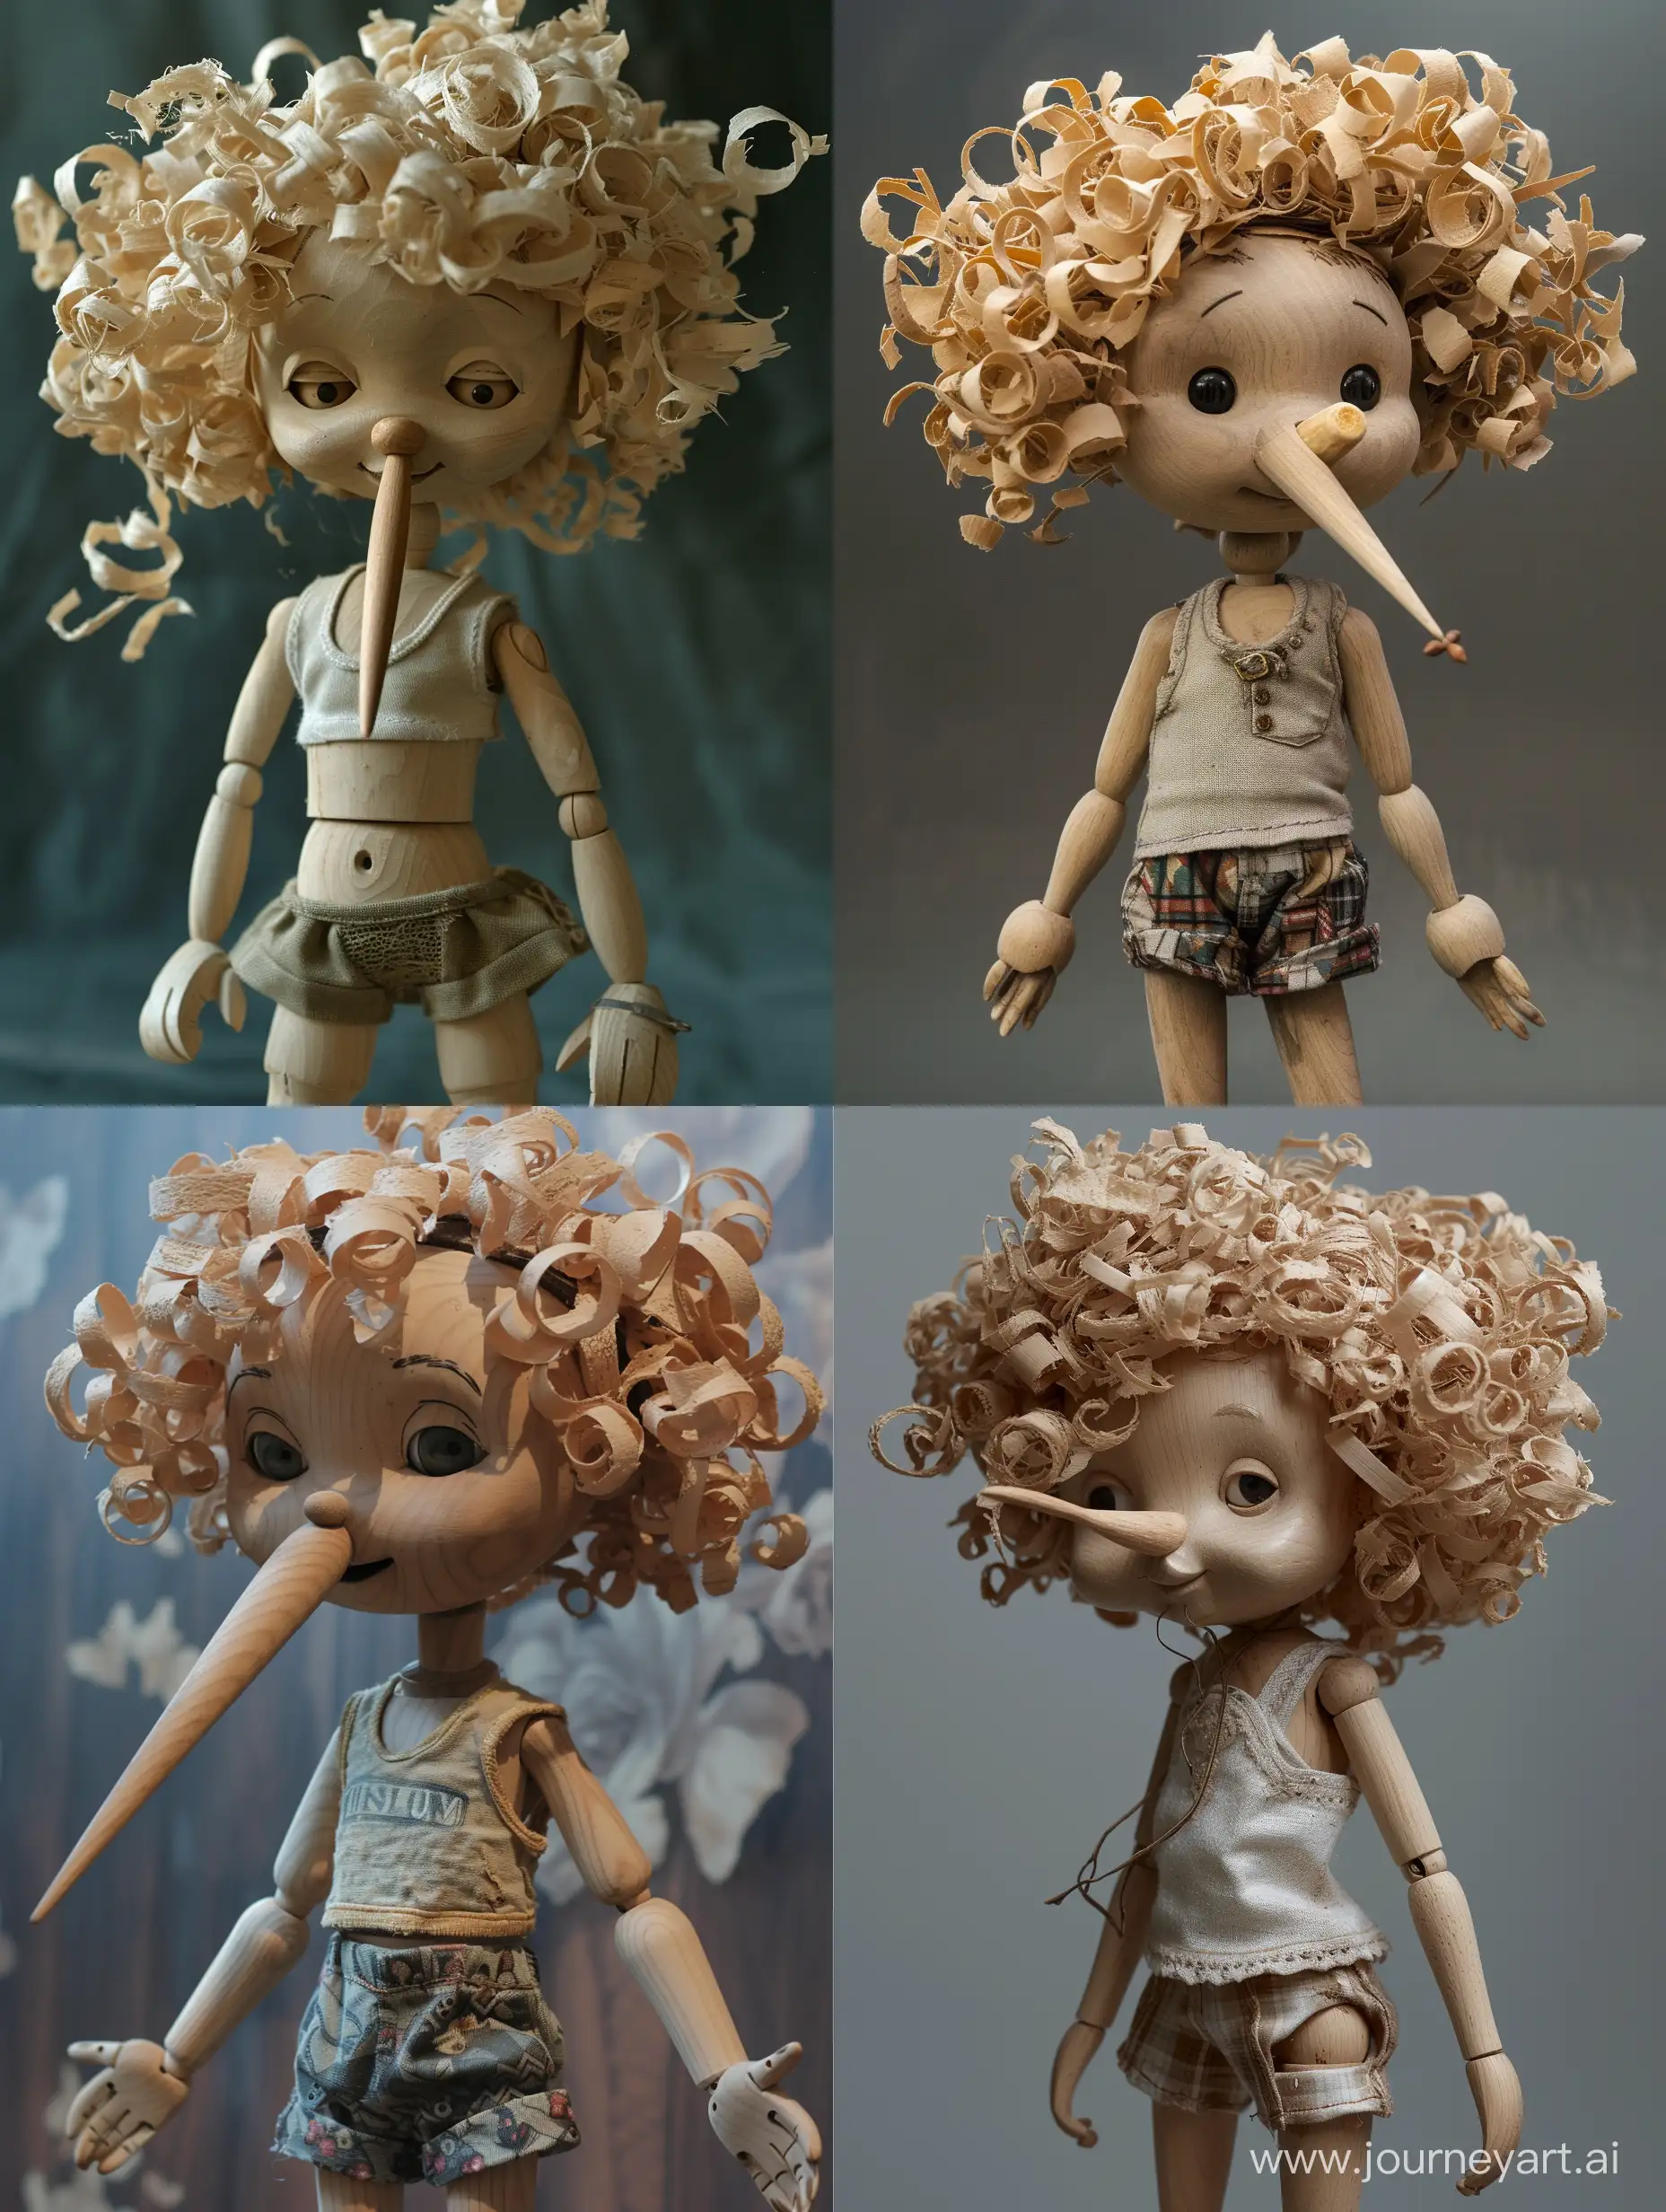 Enchanting-Wooden-PinocchioGirl-with-Curly-Hair-and-Long-Nose